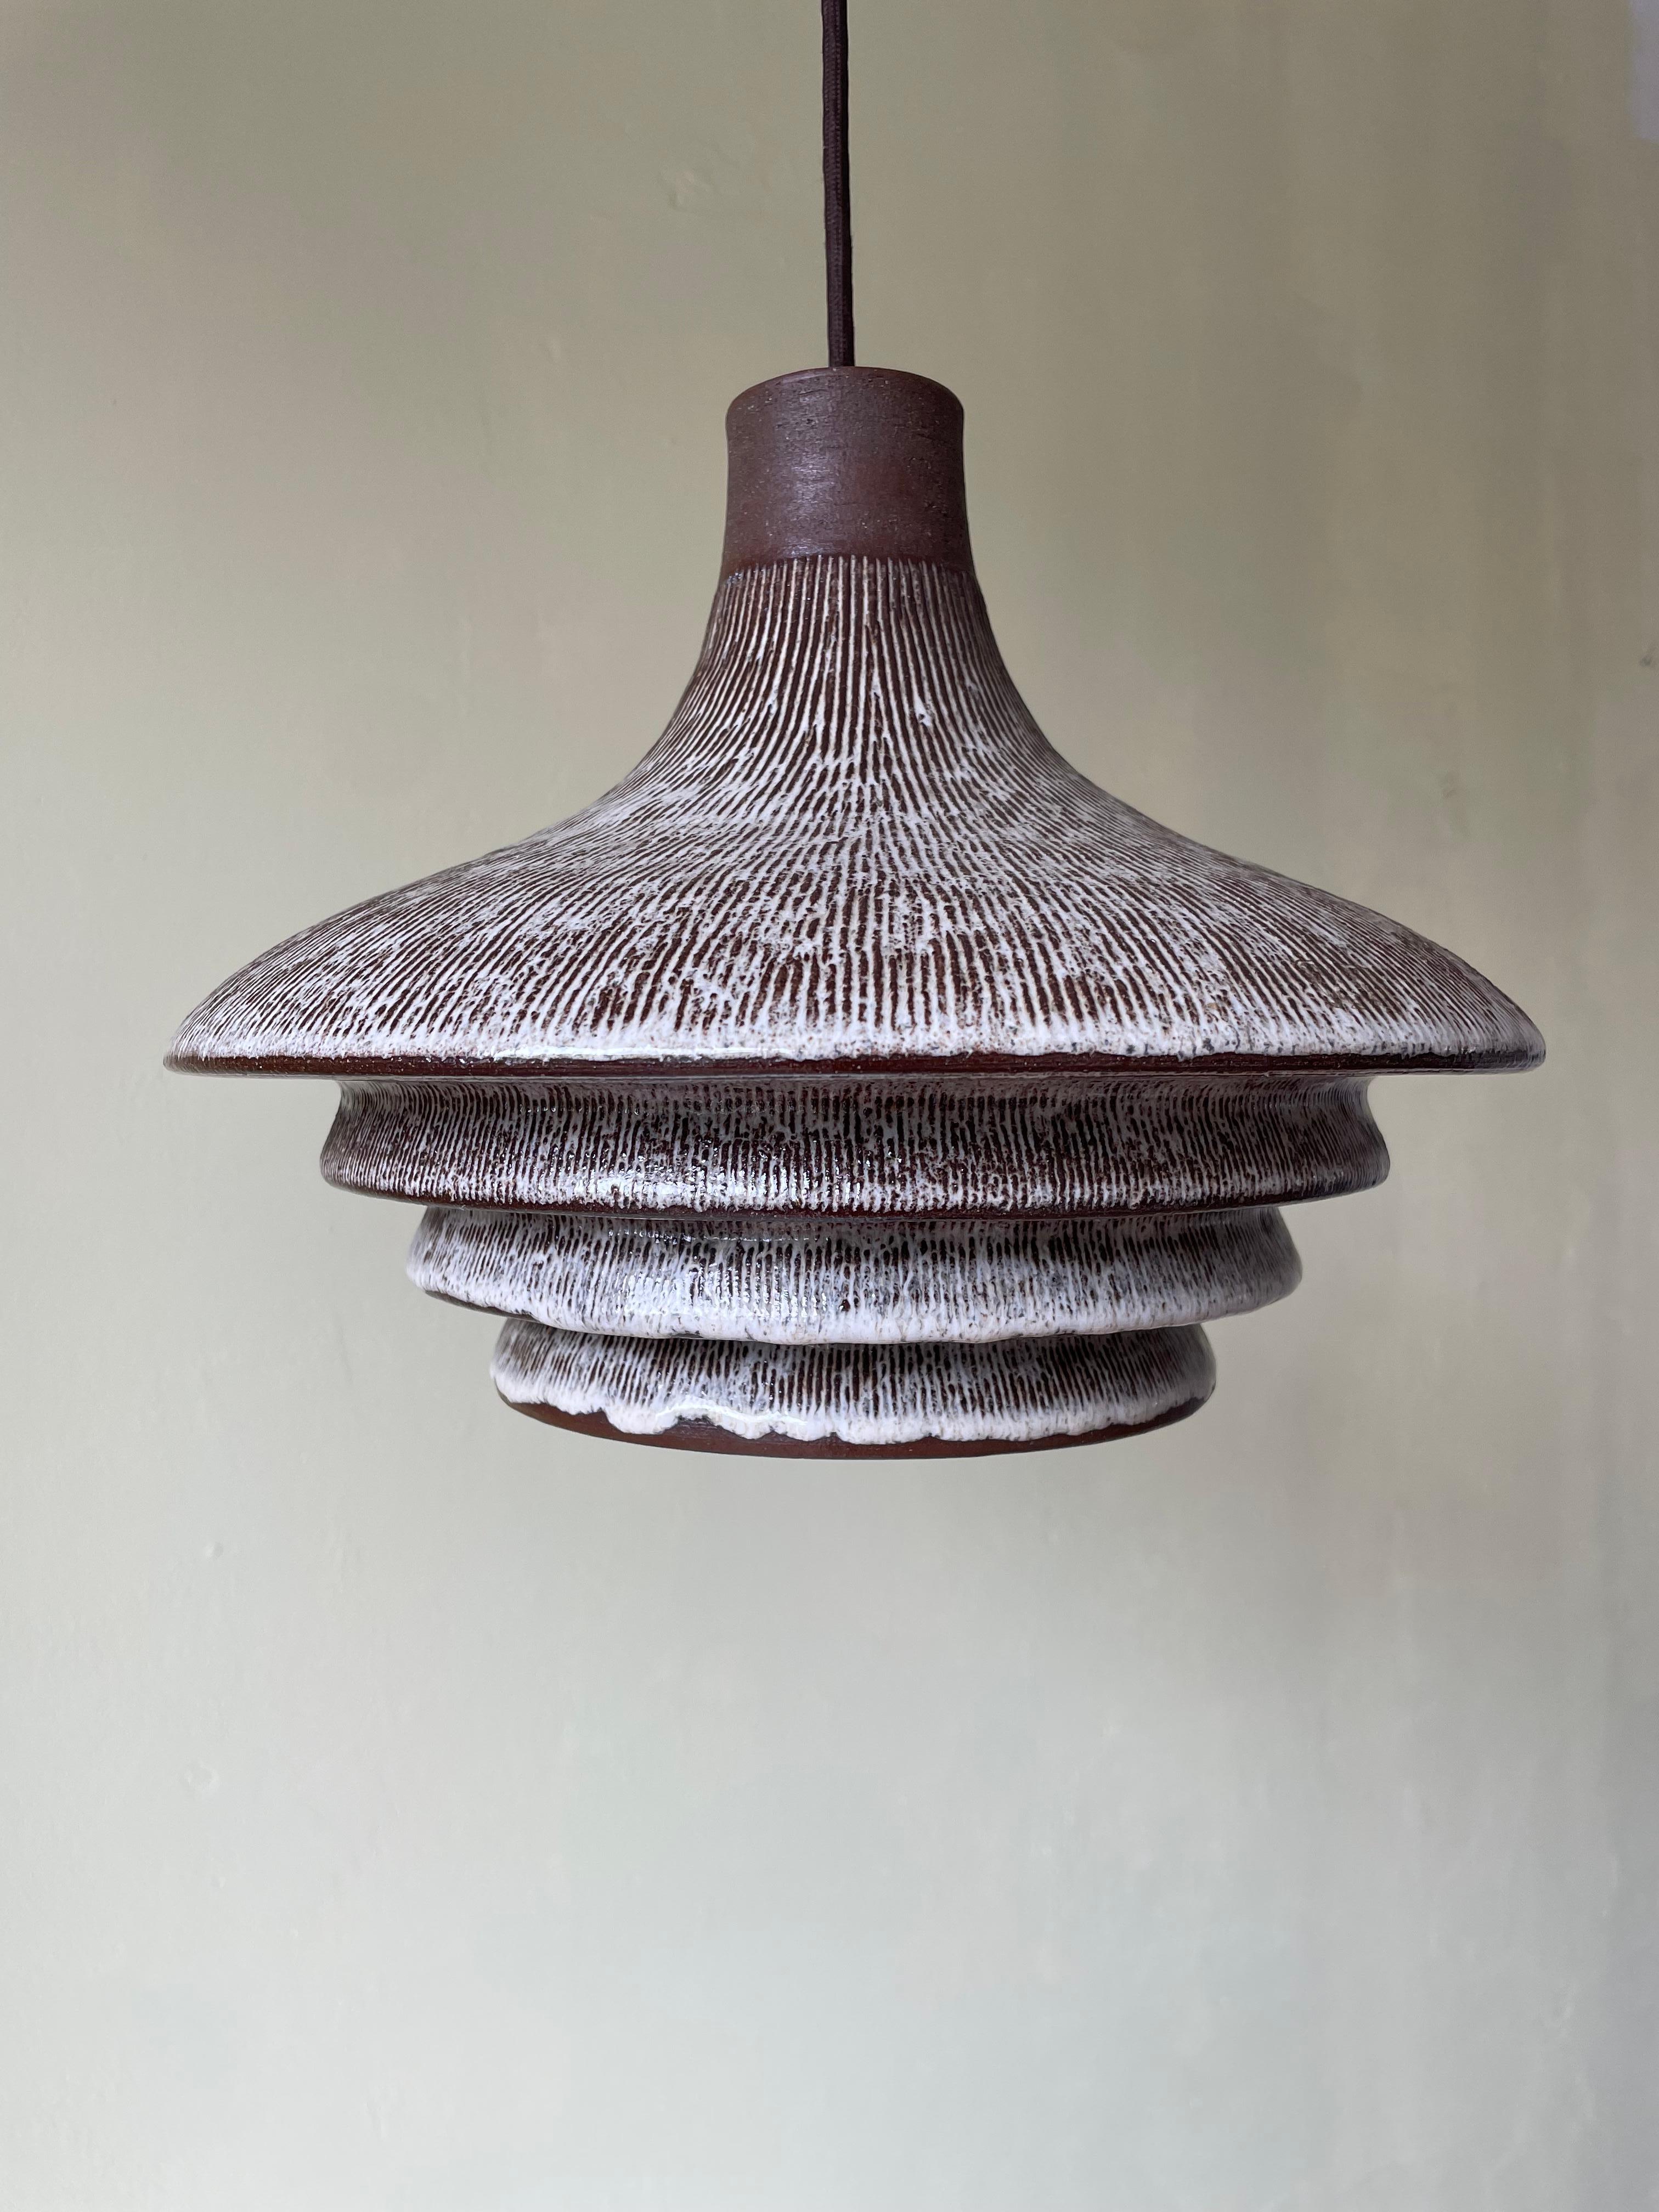 Tiered ceramic Scandinavian midcentury modern pendant with hand-carved brown and light gray relief lines from top to base under clear glaze. Four soft tiers each with oval shaped holes to let out the light. Raw top part with hand-carved soft lined